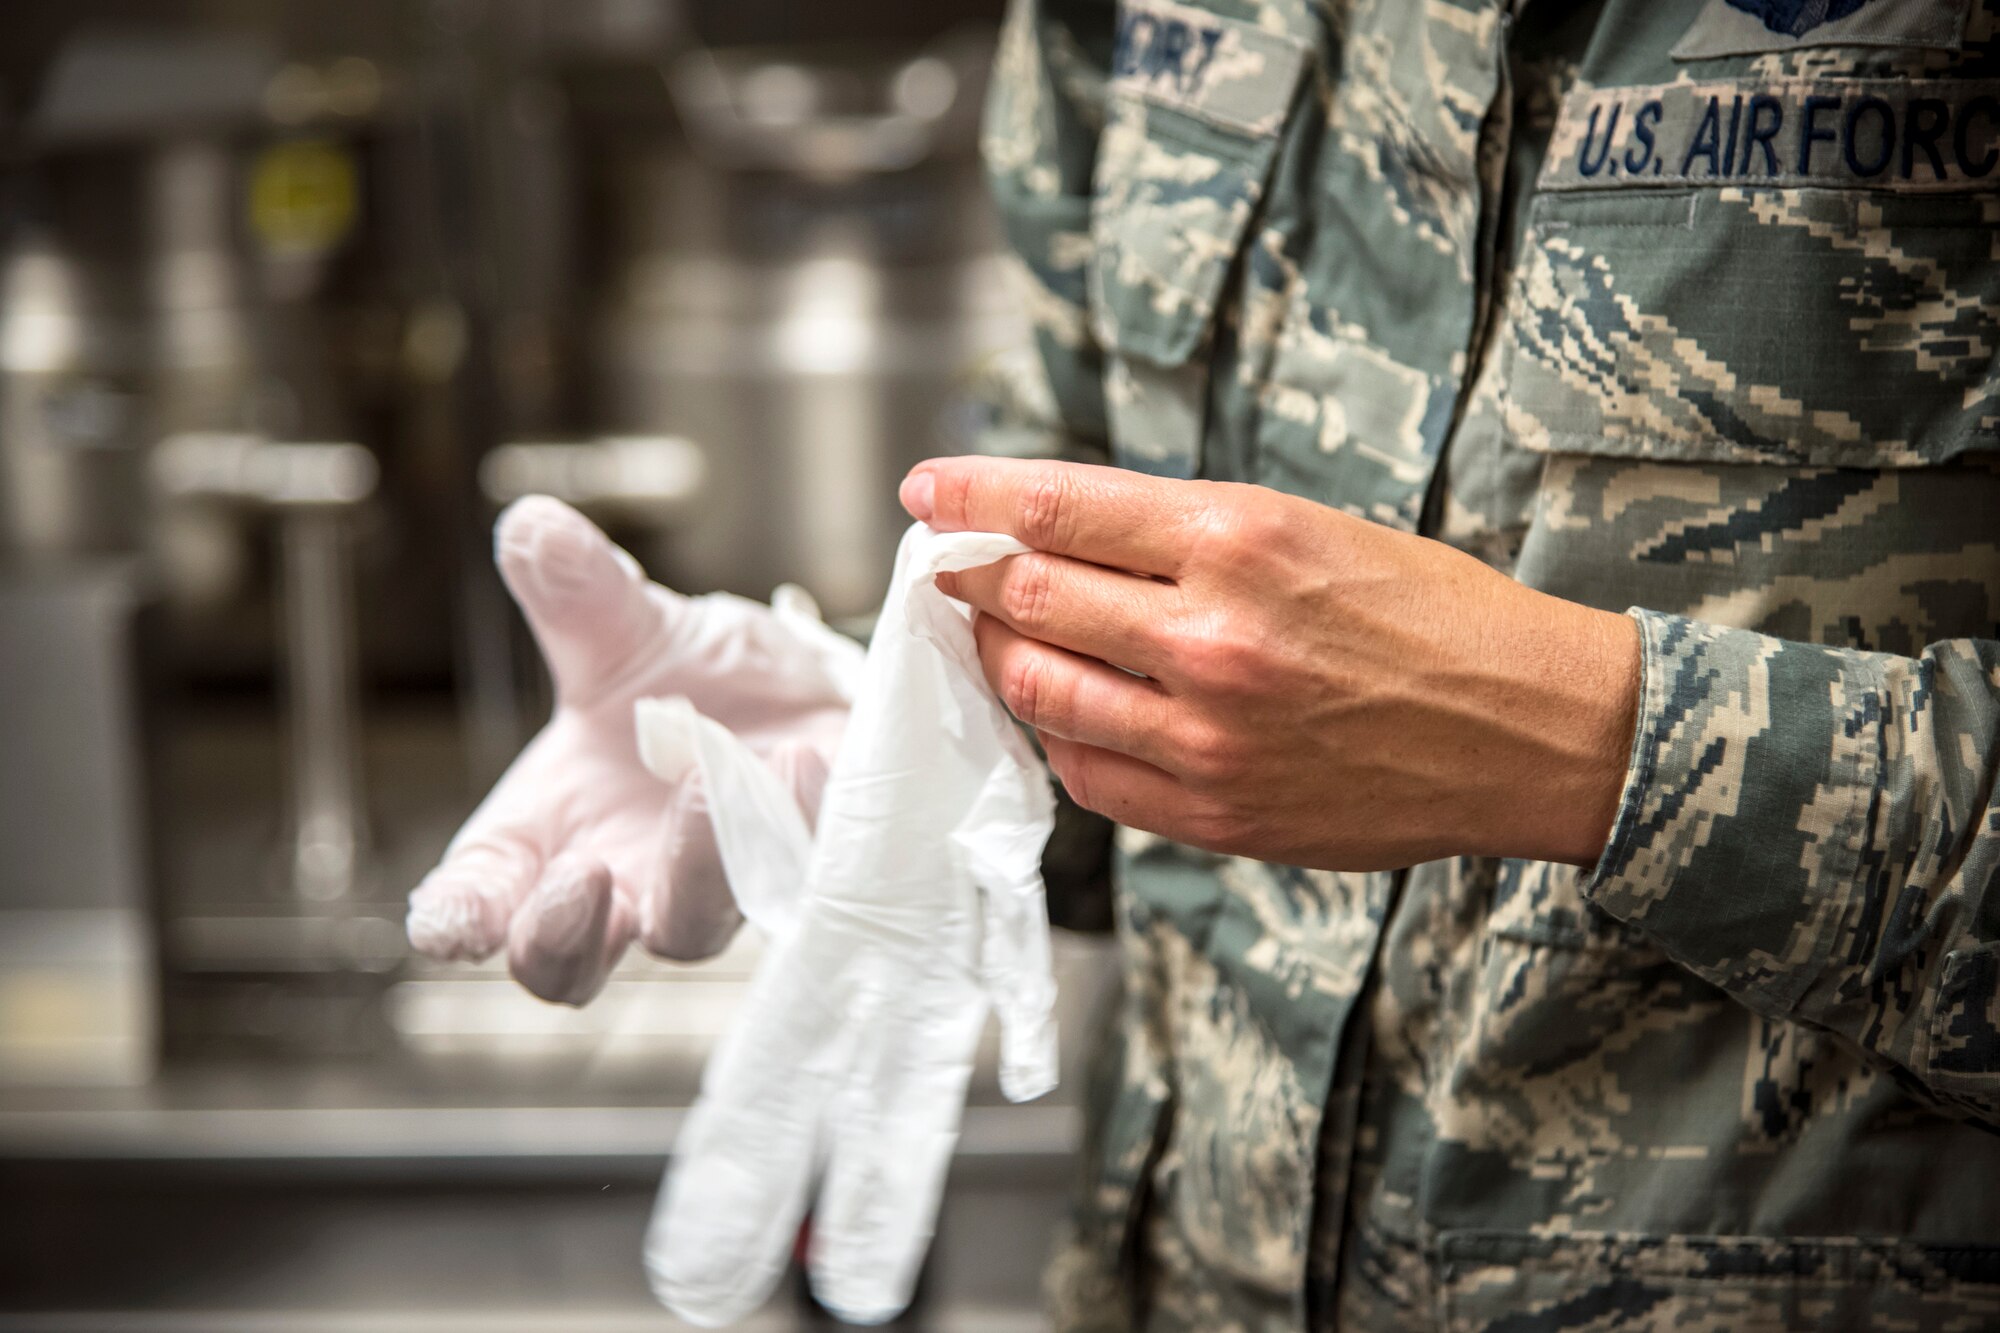 Col. Jennifer Short, 23d Wing (WG) commander, puts on gloves during an immersion tour, June 11, 2018, at Moody Air Force Base, Ga. Short and Chief Master Sgt James Allen, 23d WG command chief, toured the Georgia Pines Dining Facility and the Information Learning Center to gain a better understanding of their overall mission, capabilities and comprehensive duties. (U.S. Air Force photo by Airman 1st Class Eugene Oliver)